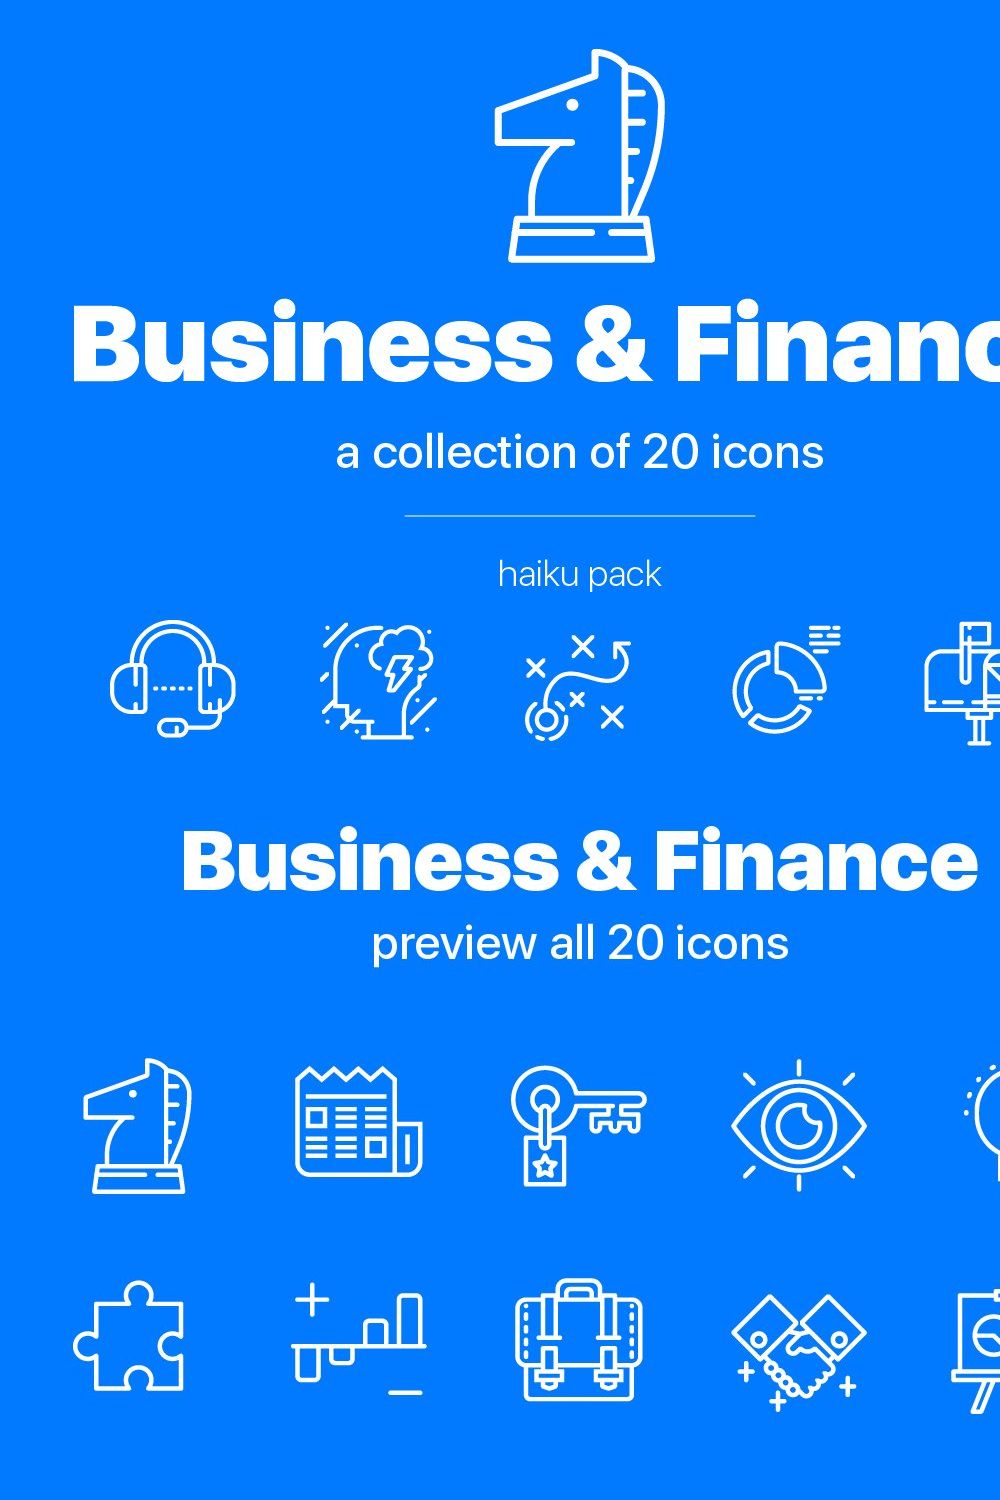 Business & Finance Icons pinterest preview image.